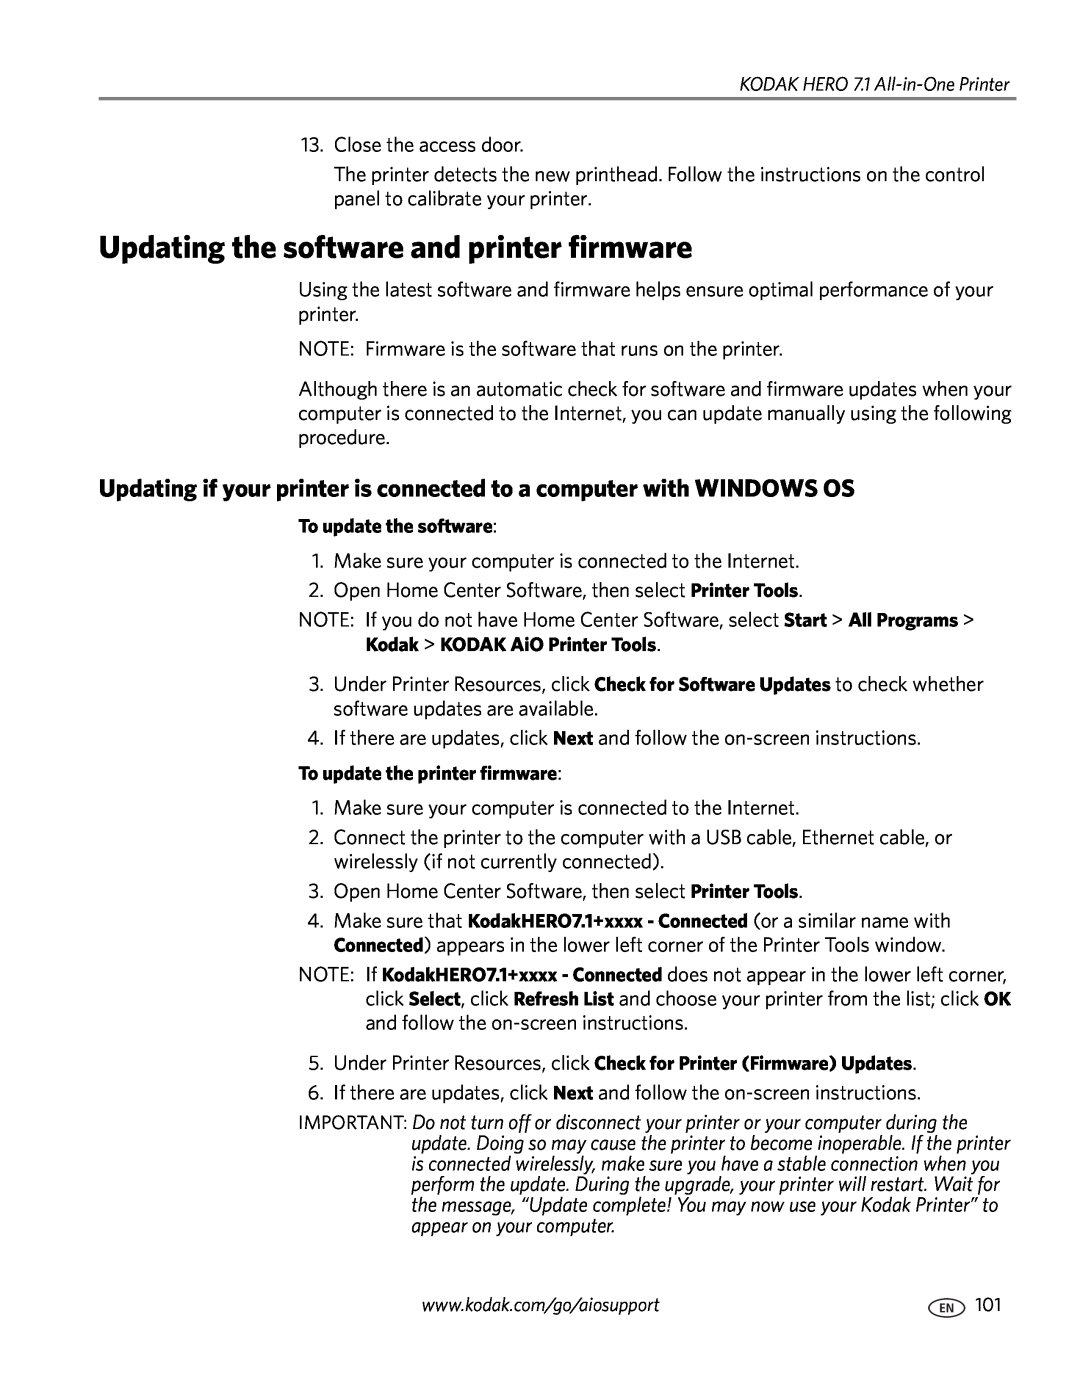 Kodak 7.1 Updating the software and printer firmware, Updating if your printer is connected to a computer with WINDOWS OS 